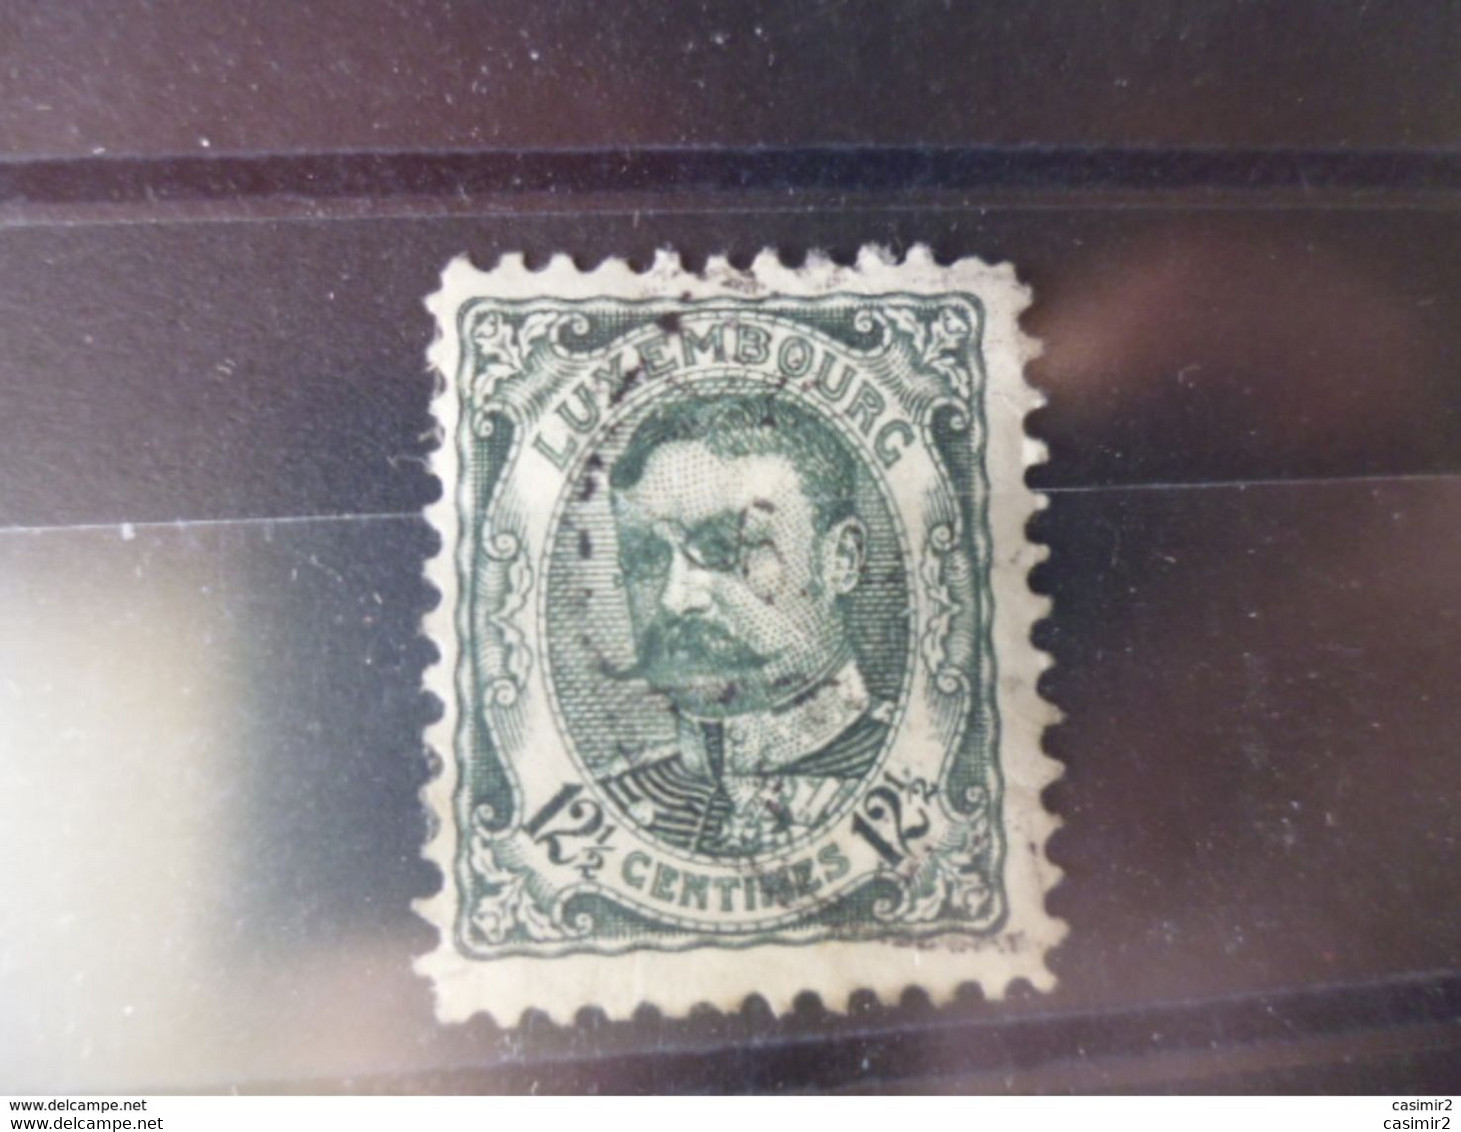 LUXEMBOURG TIMBRE YVERT N° 75 - 1906 Guglielmo IV